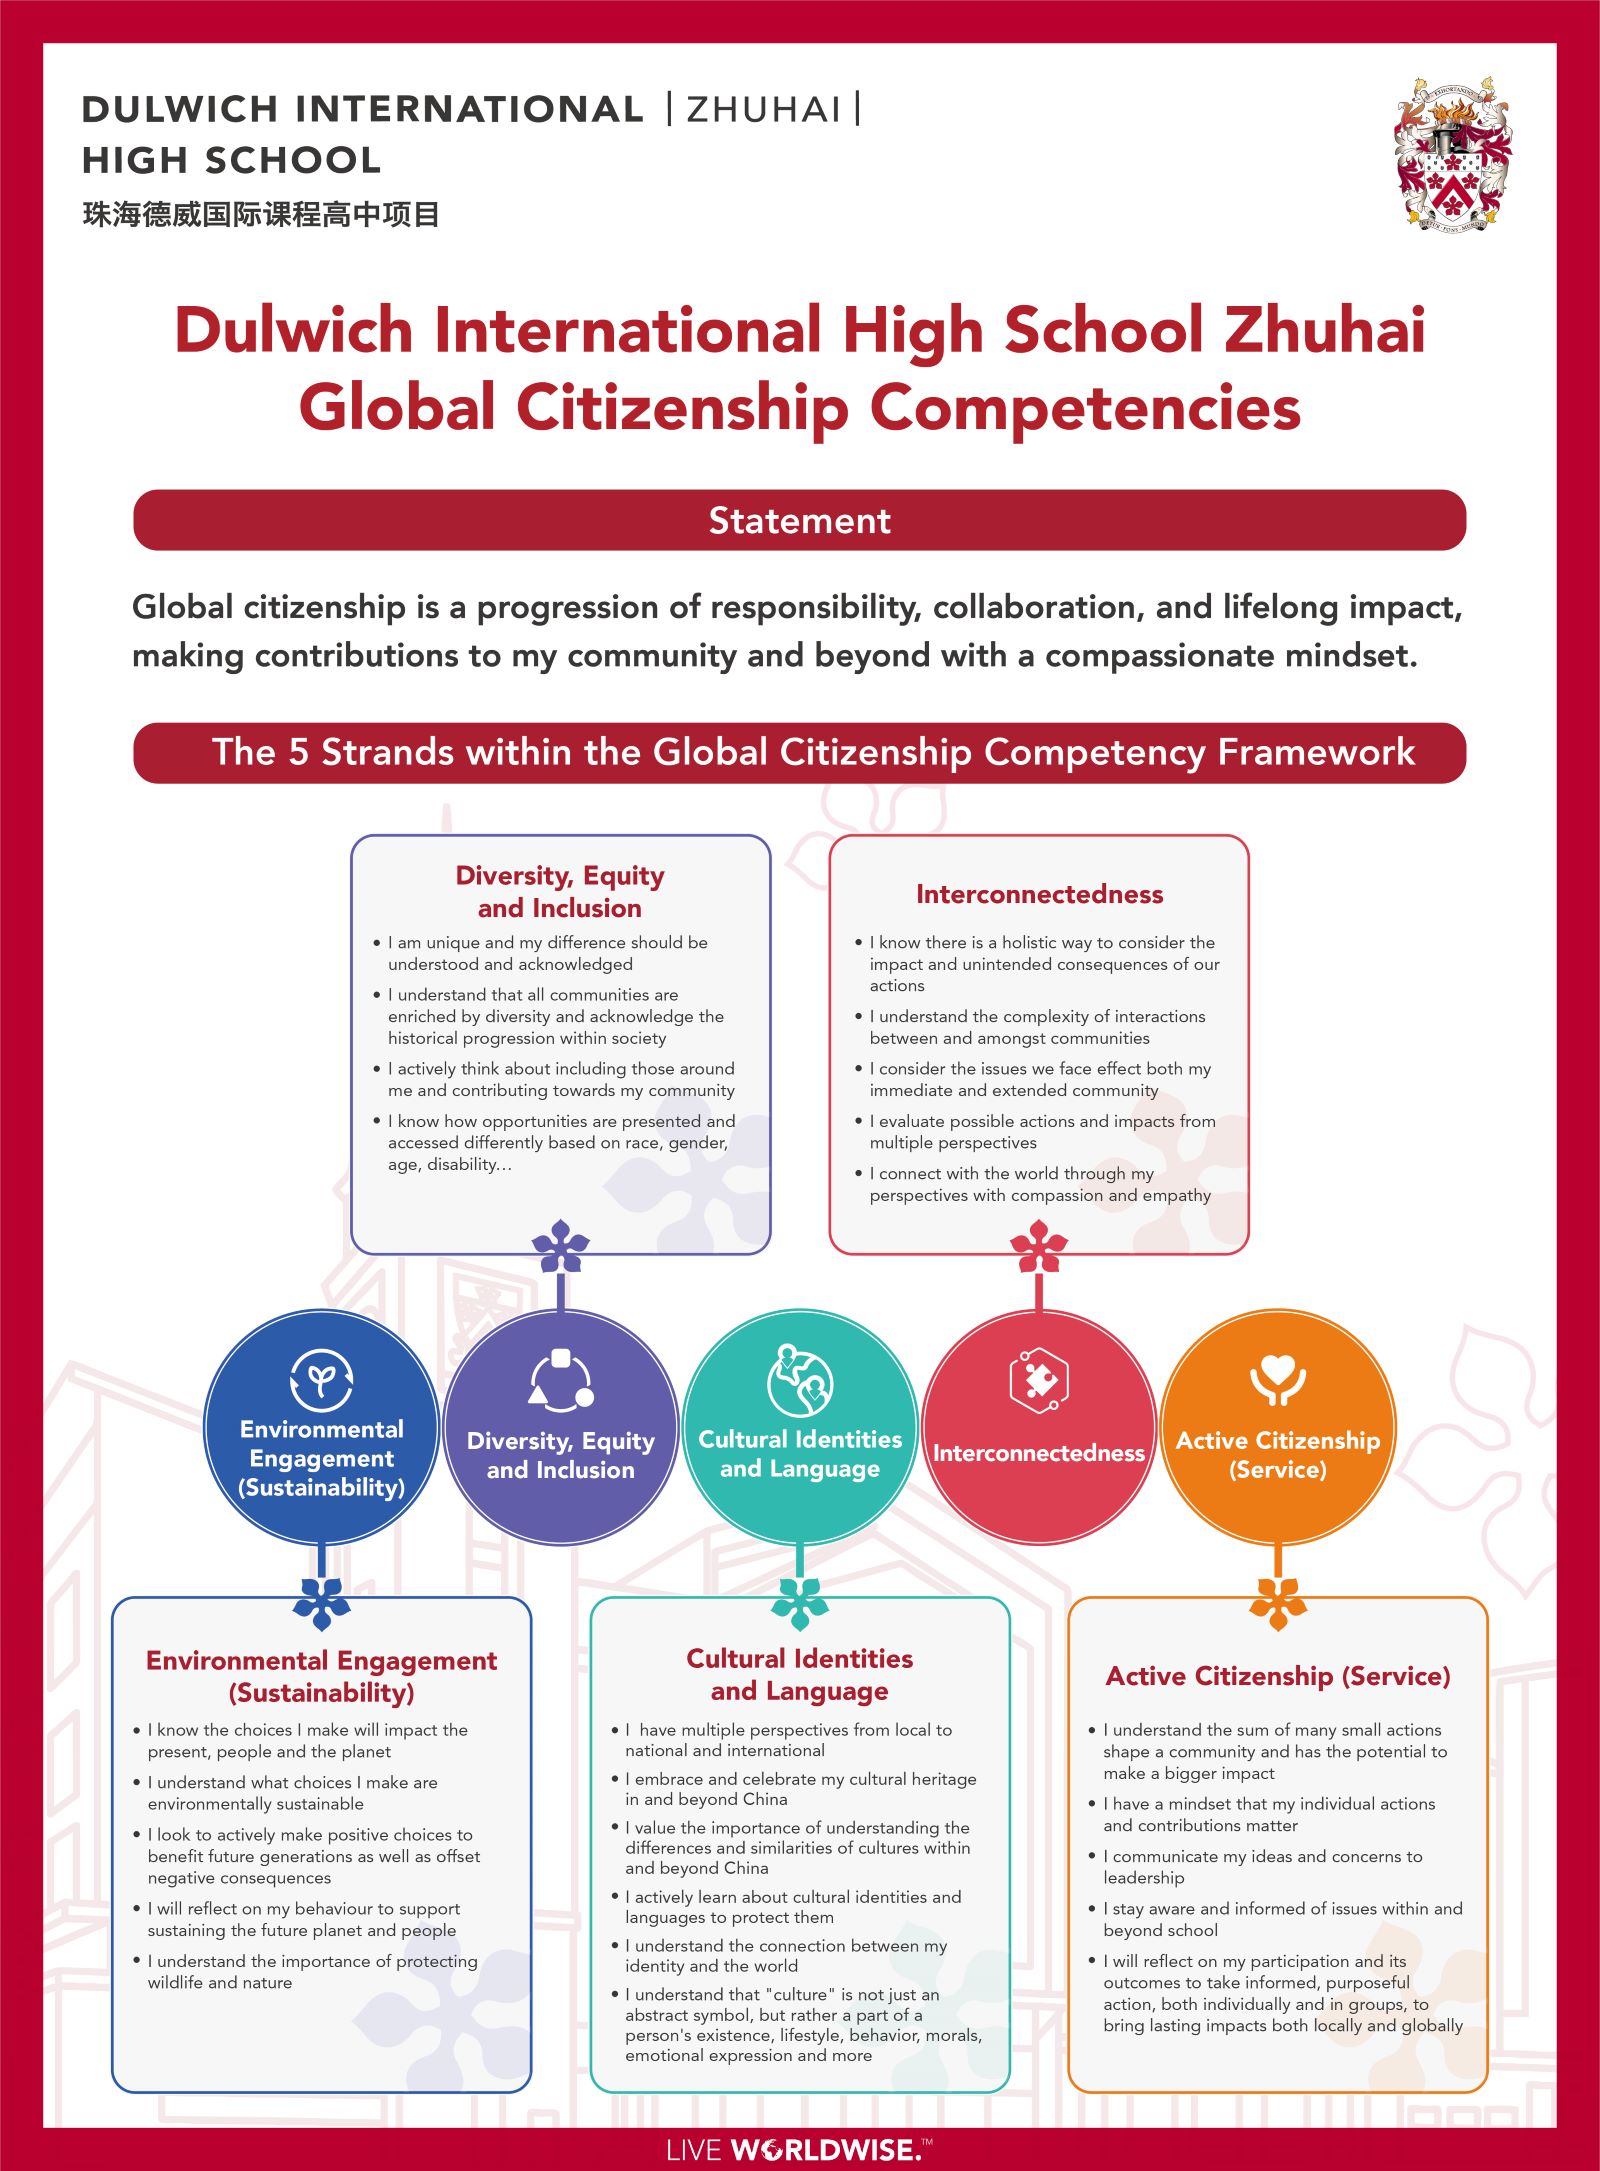 dhzh-global-competencies-with-aspects-eng-ay22-23-cc